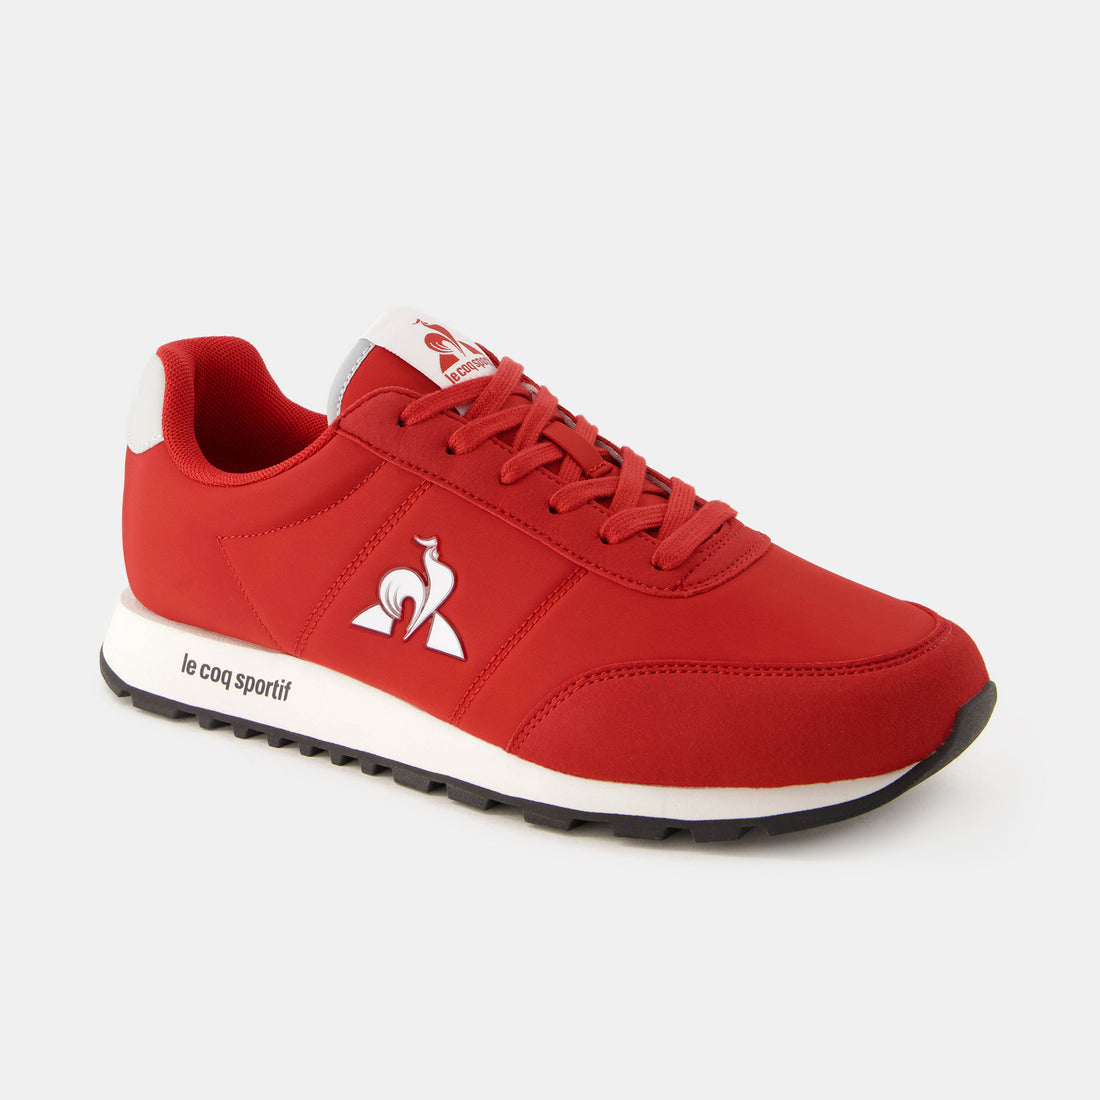 2410497-RACERONE_2 pompeian red | Chaussures RACERONE_2 Homme